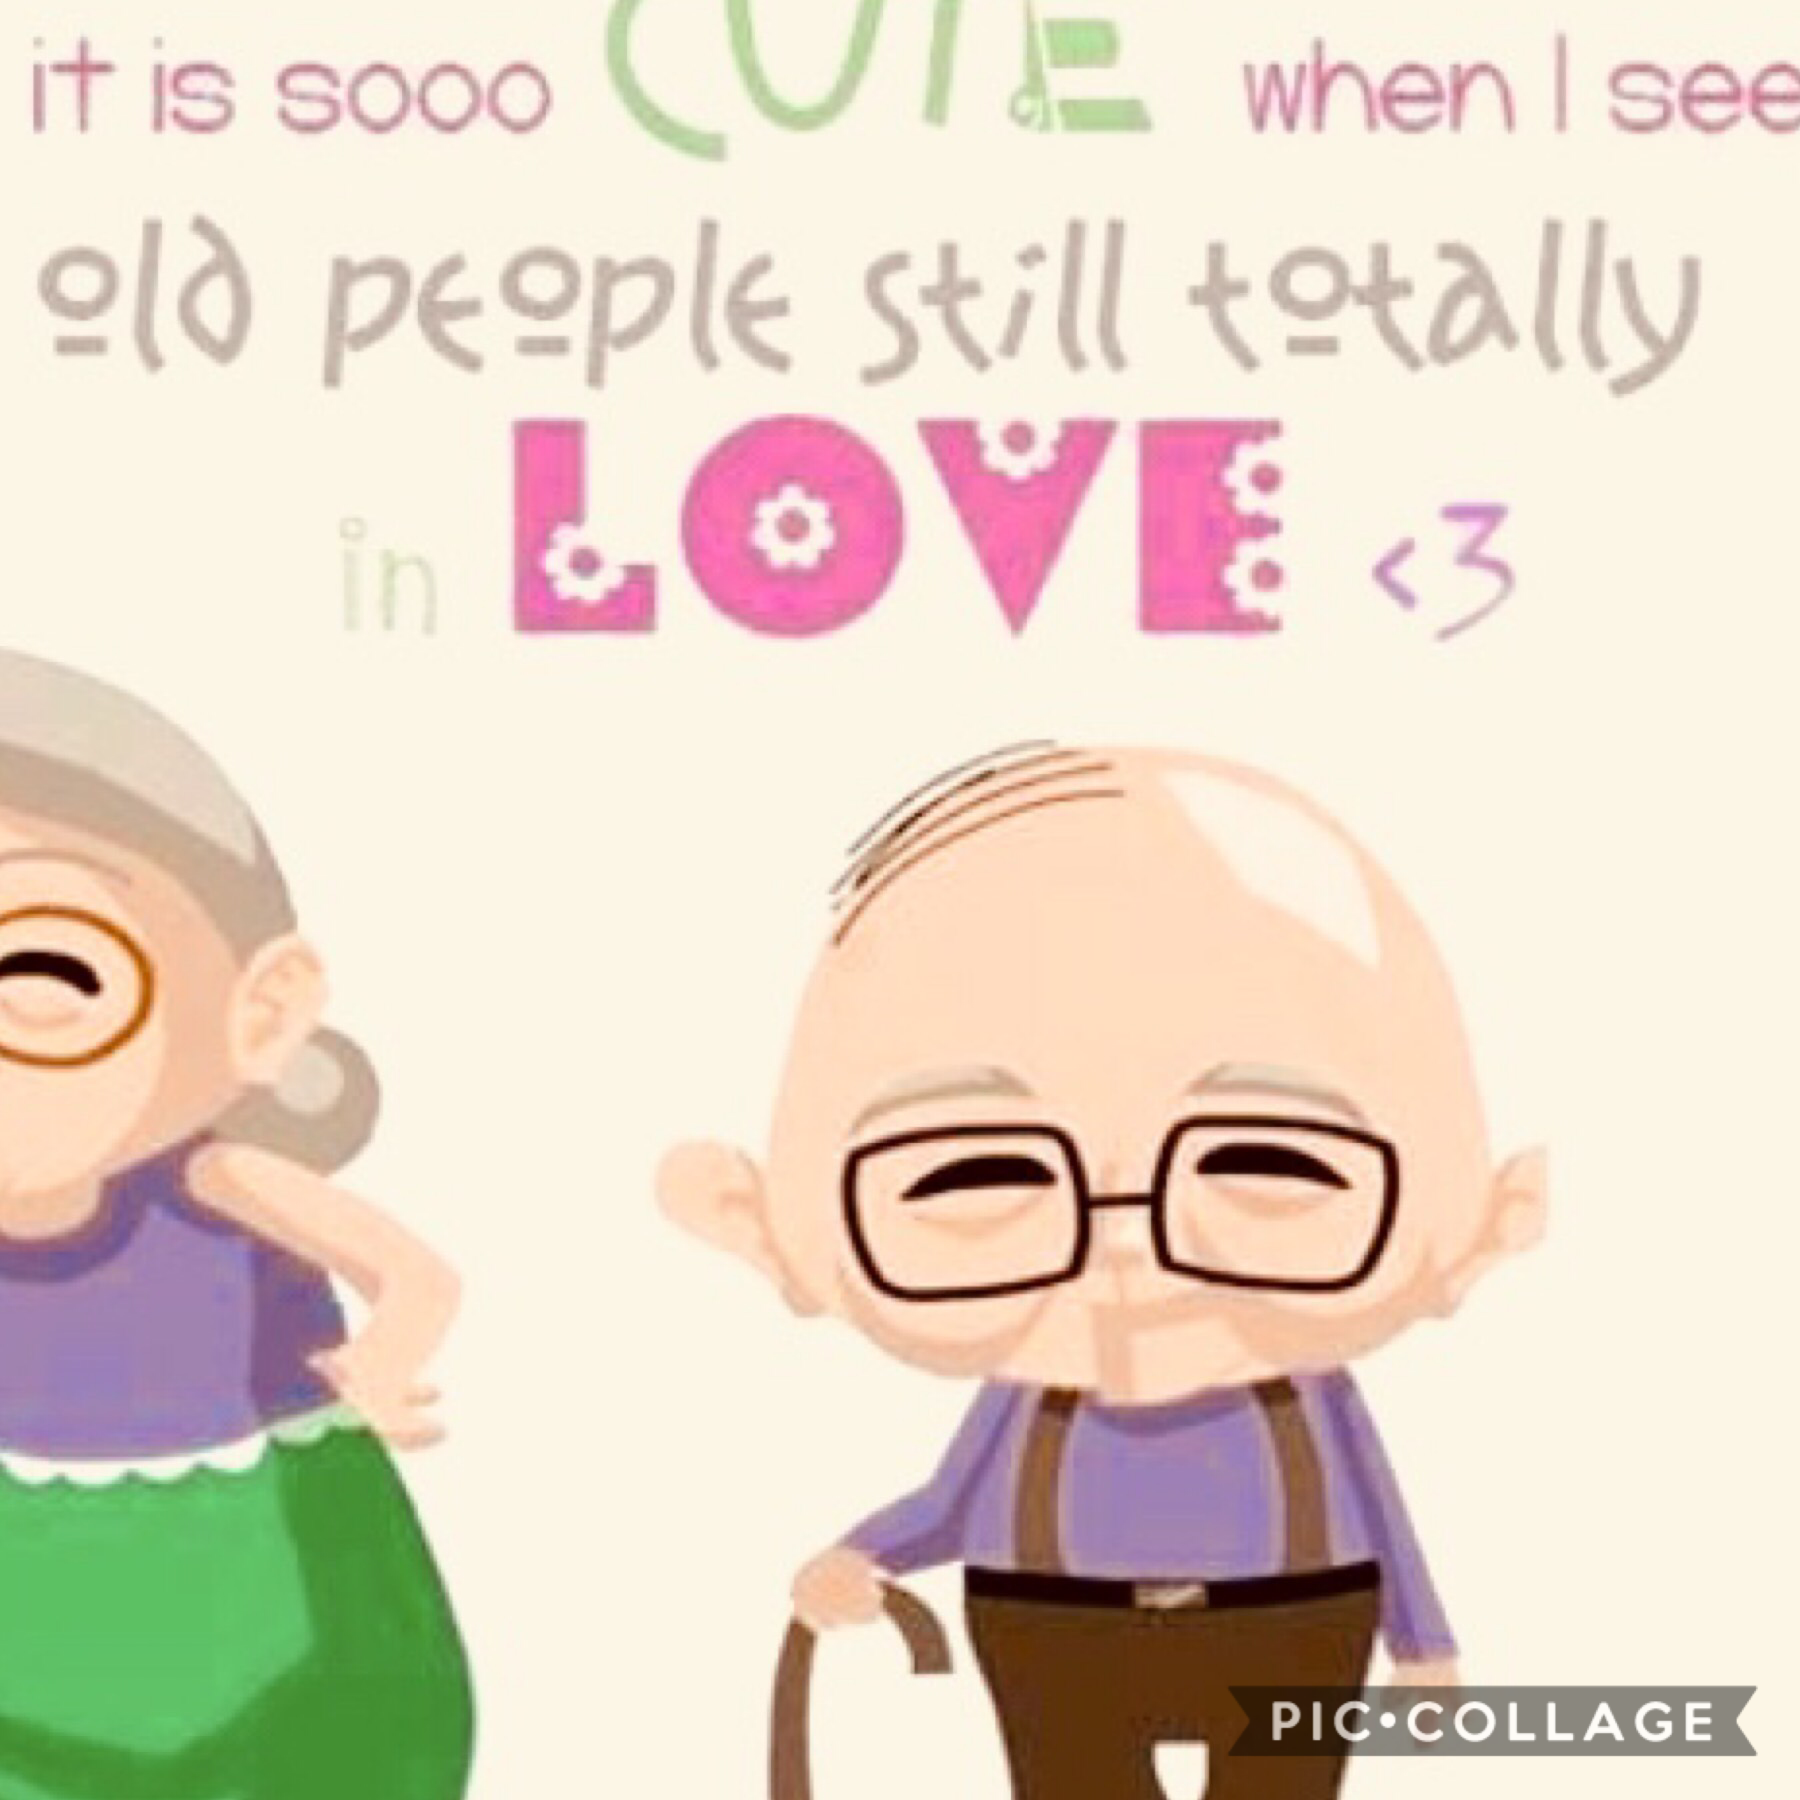 It sooo CUTE when I see old people still totally in LOVE